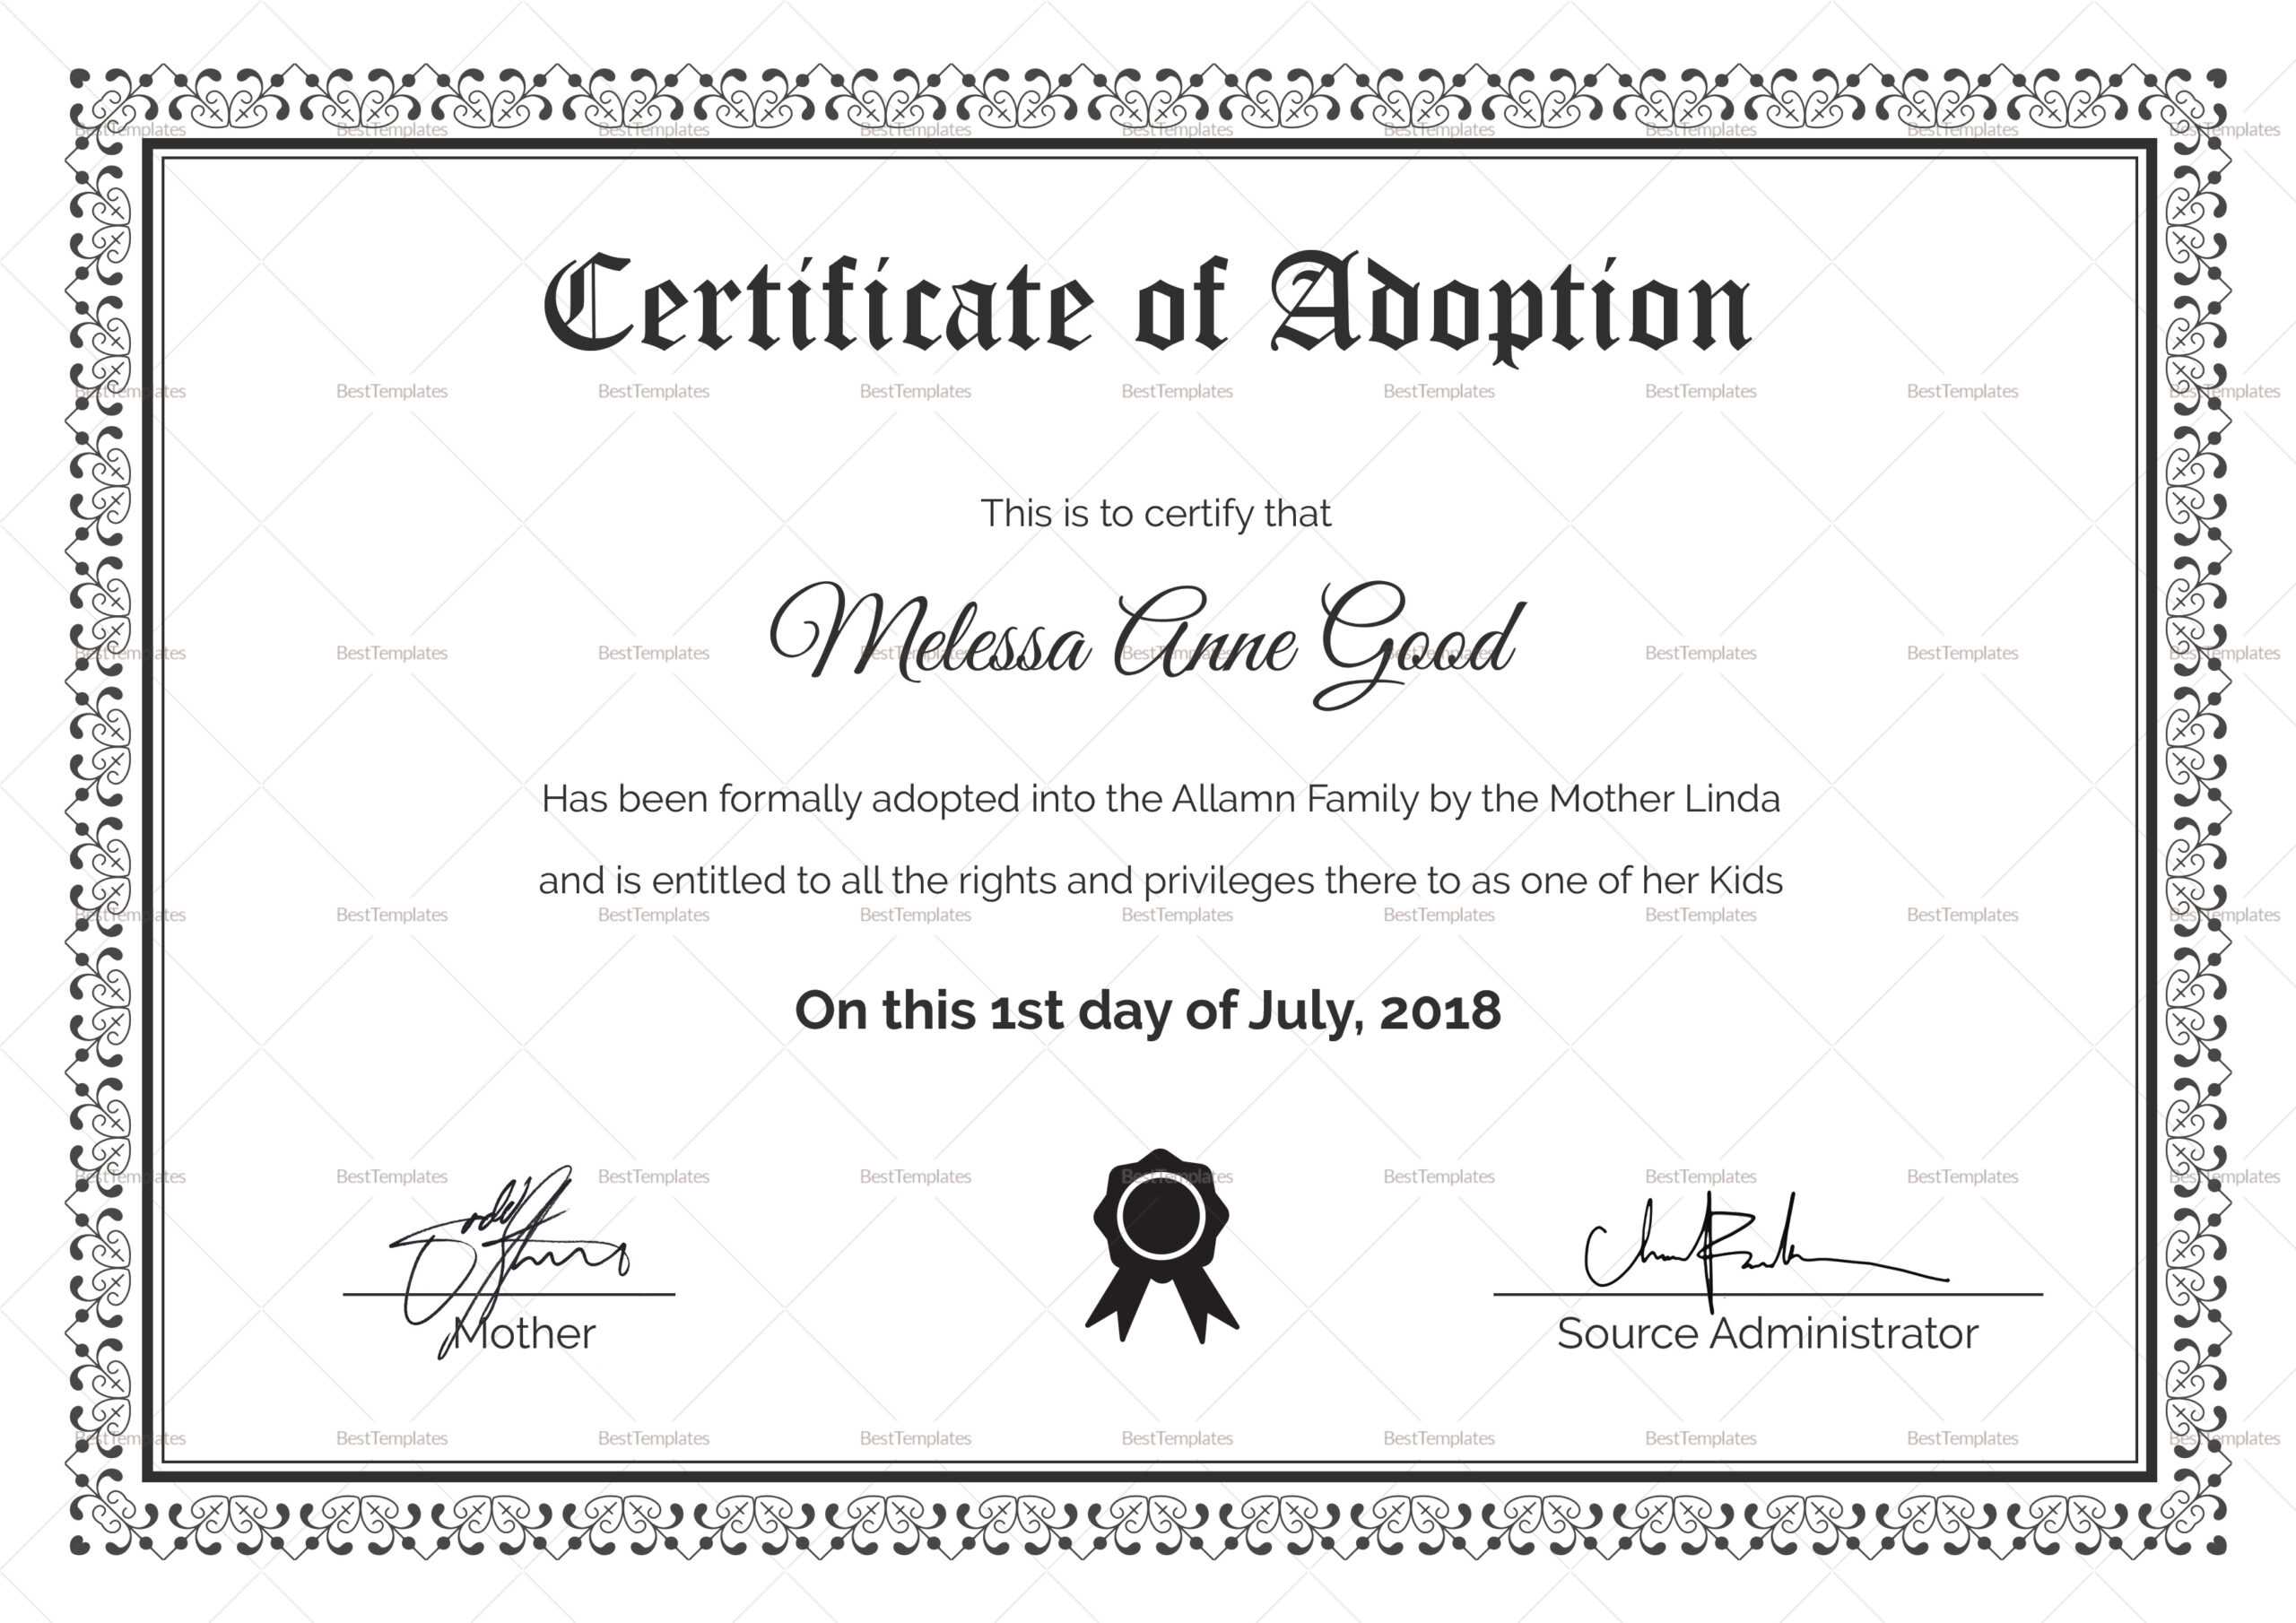 Adoption Certificate Design Template Intended For Adoption Certificate Template